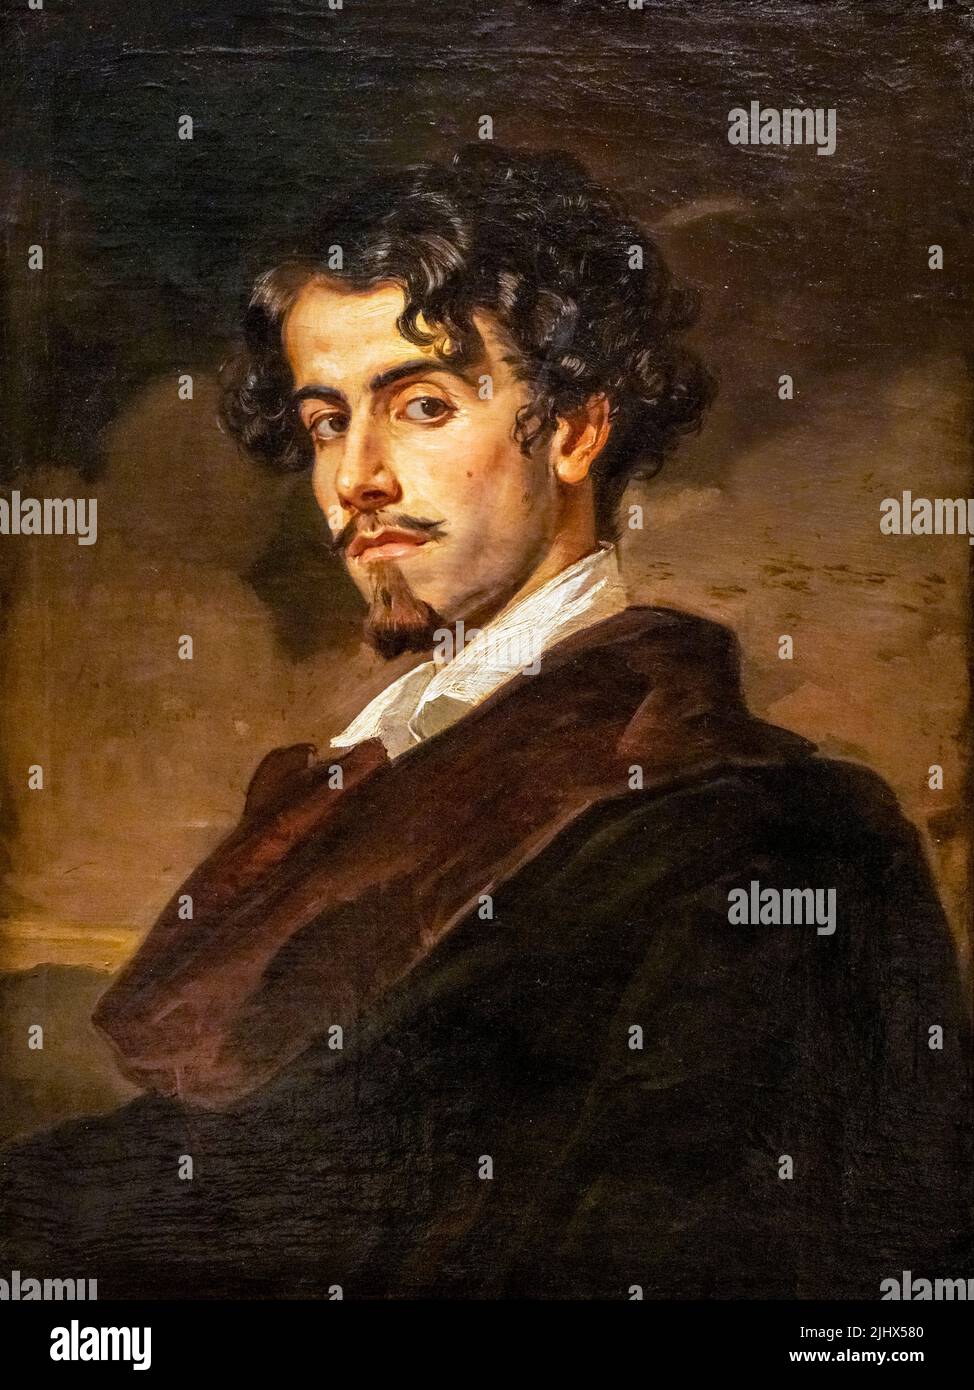 Portrait of Spanish poet and writer Gustavo Adolfo Bécquer, 1836 - 1870 by his brother Valeriano Dominquez Bécquer, 1833 - 1870.   On display in the Stock Photo